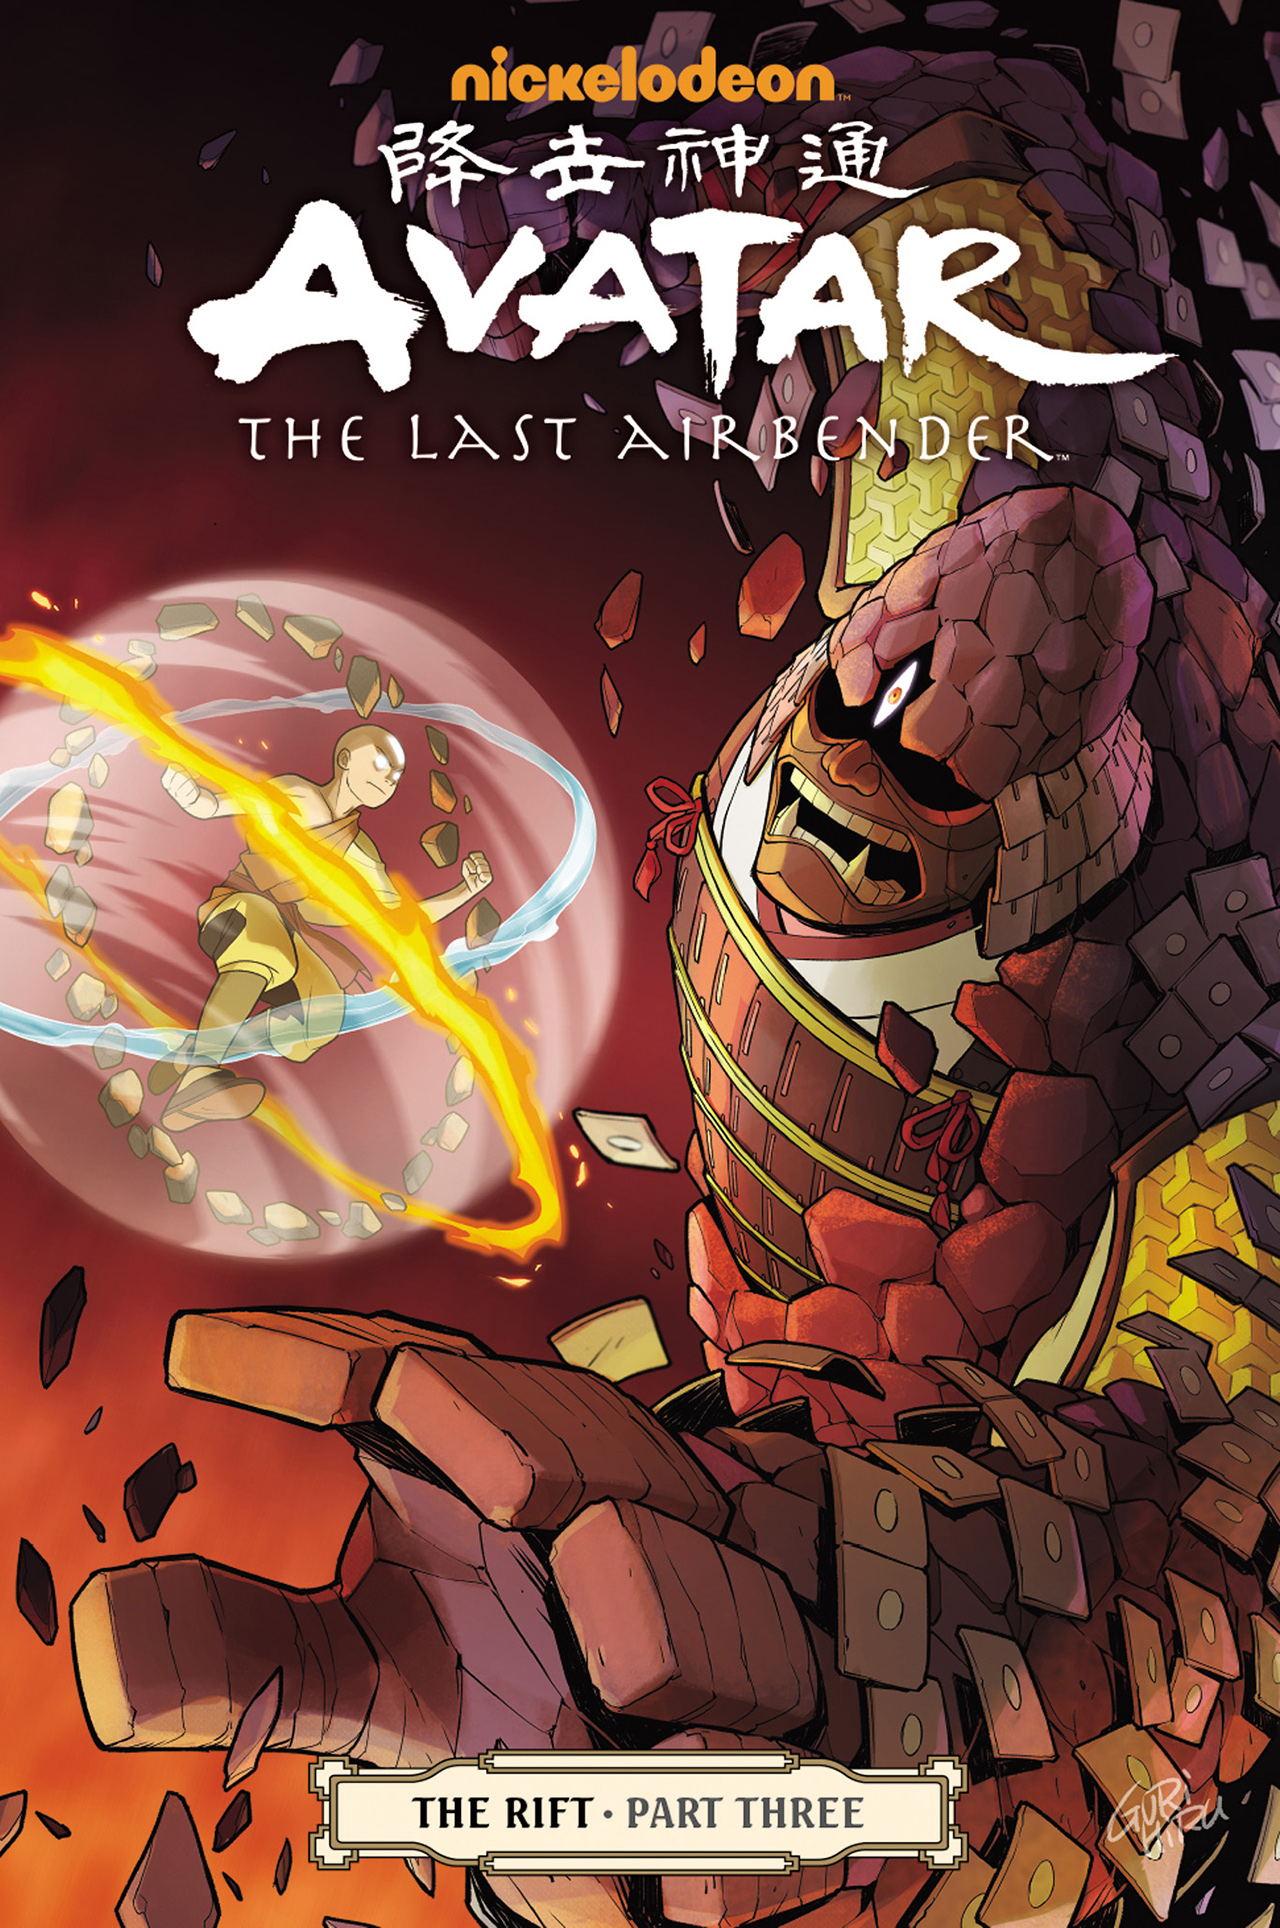 Read online Nickelodeon Avatar: The Last Airbender - The Rift comic -  Issue # Part 3 - 1